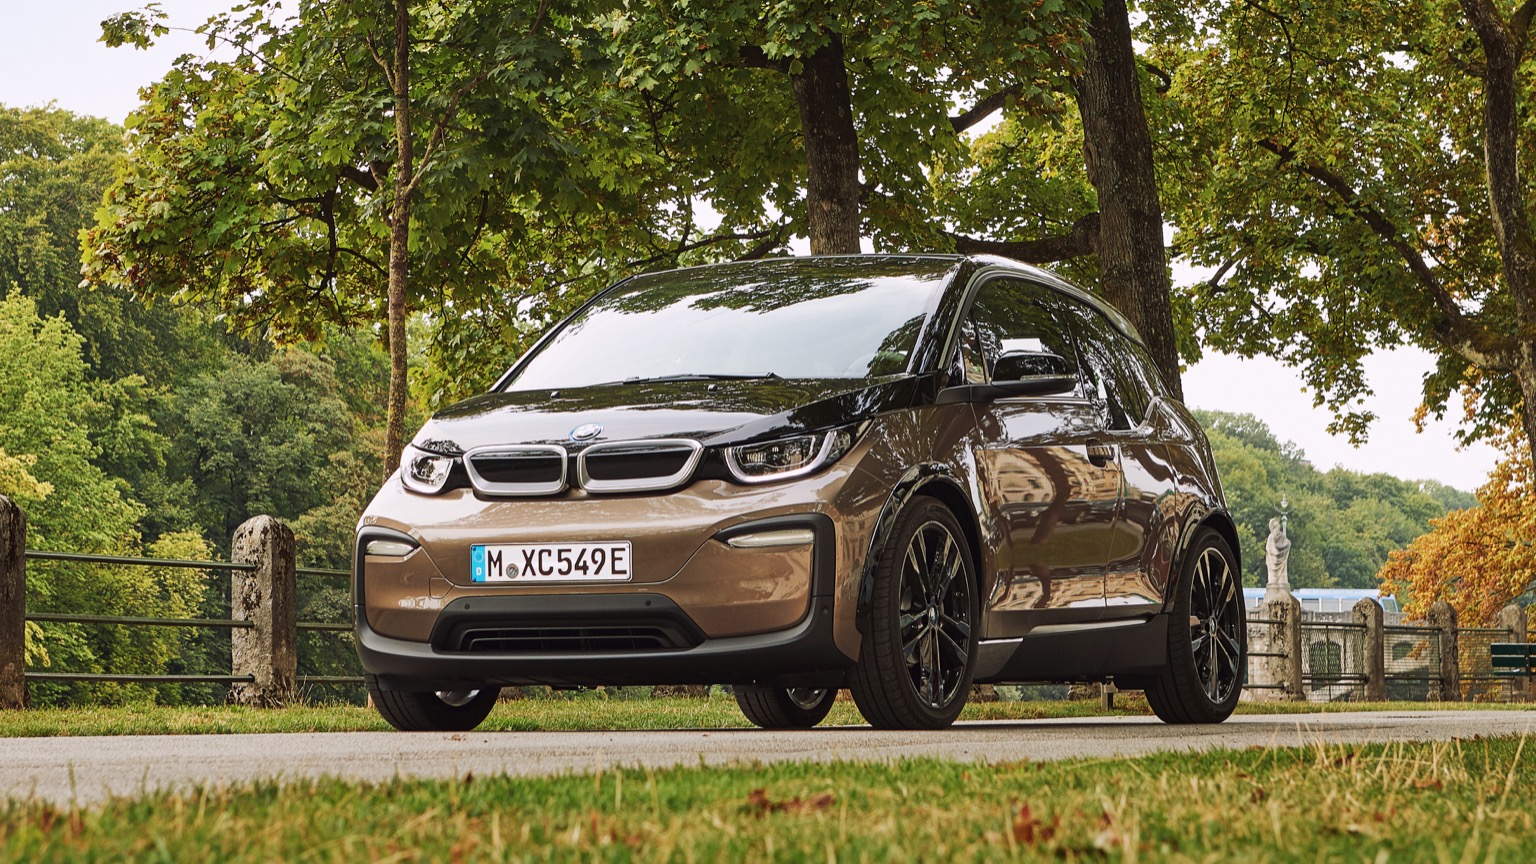 EV Charger Installations for BMW i3